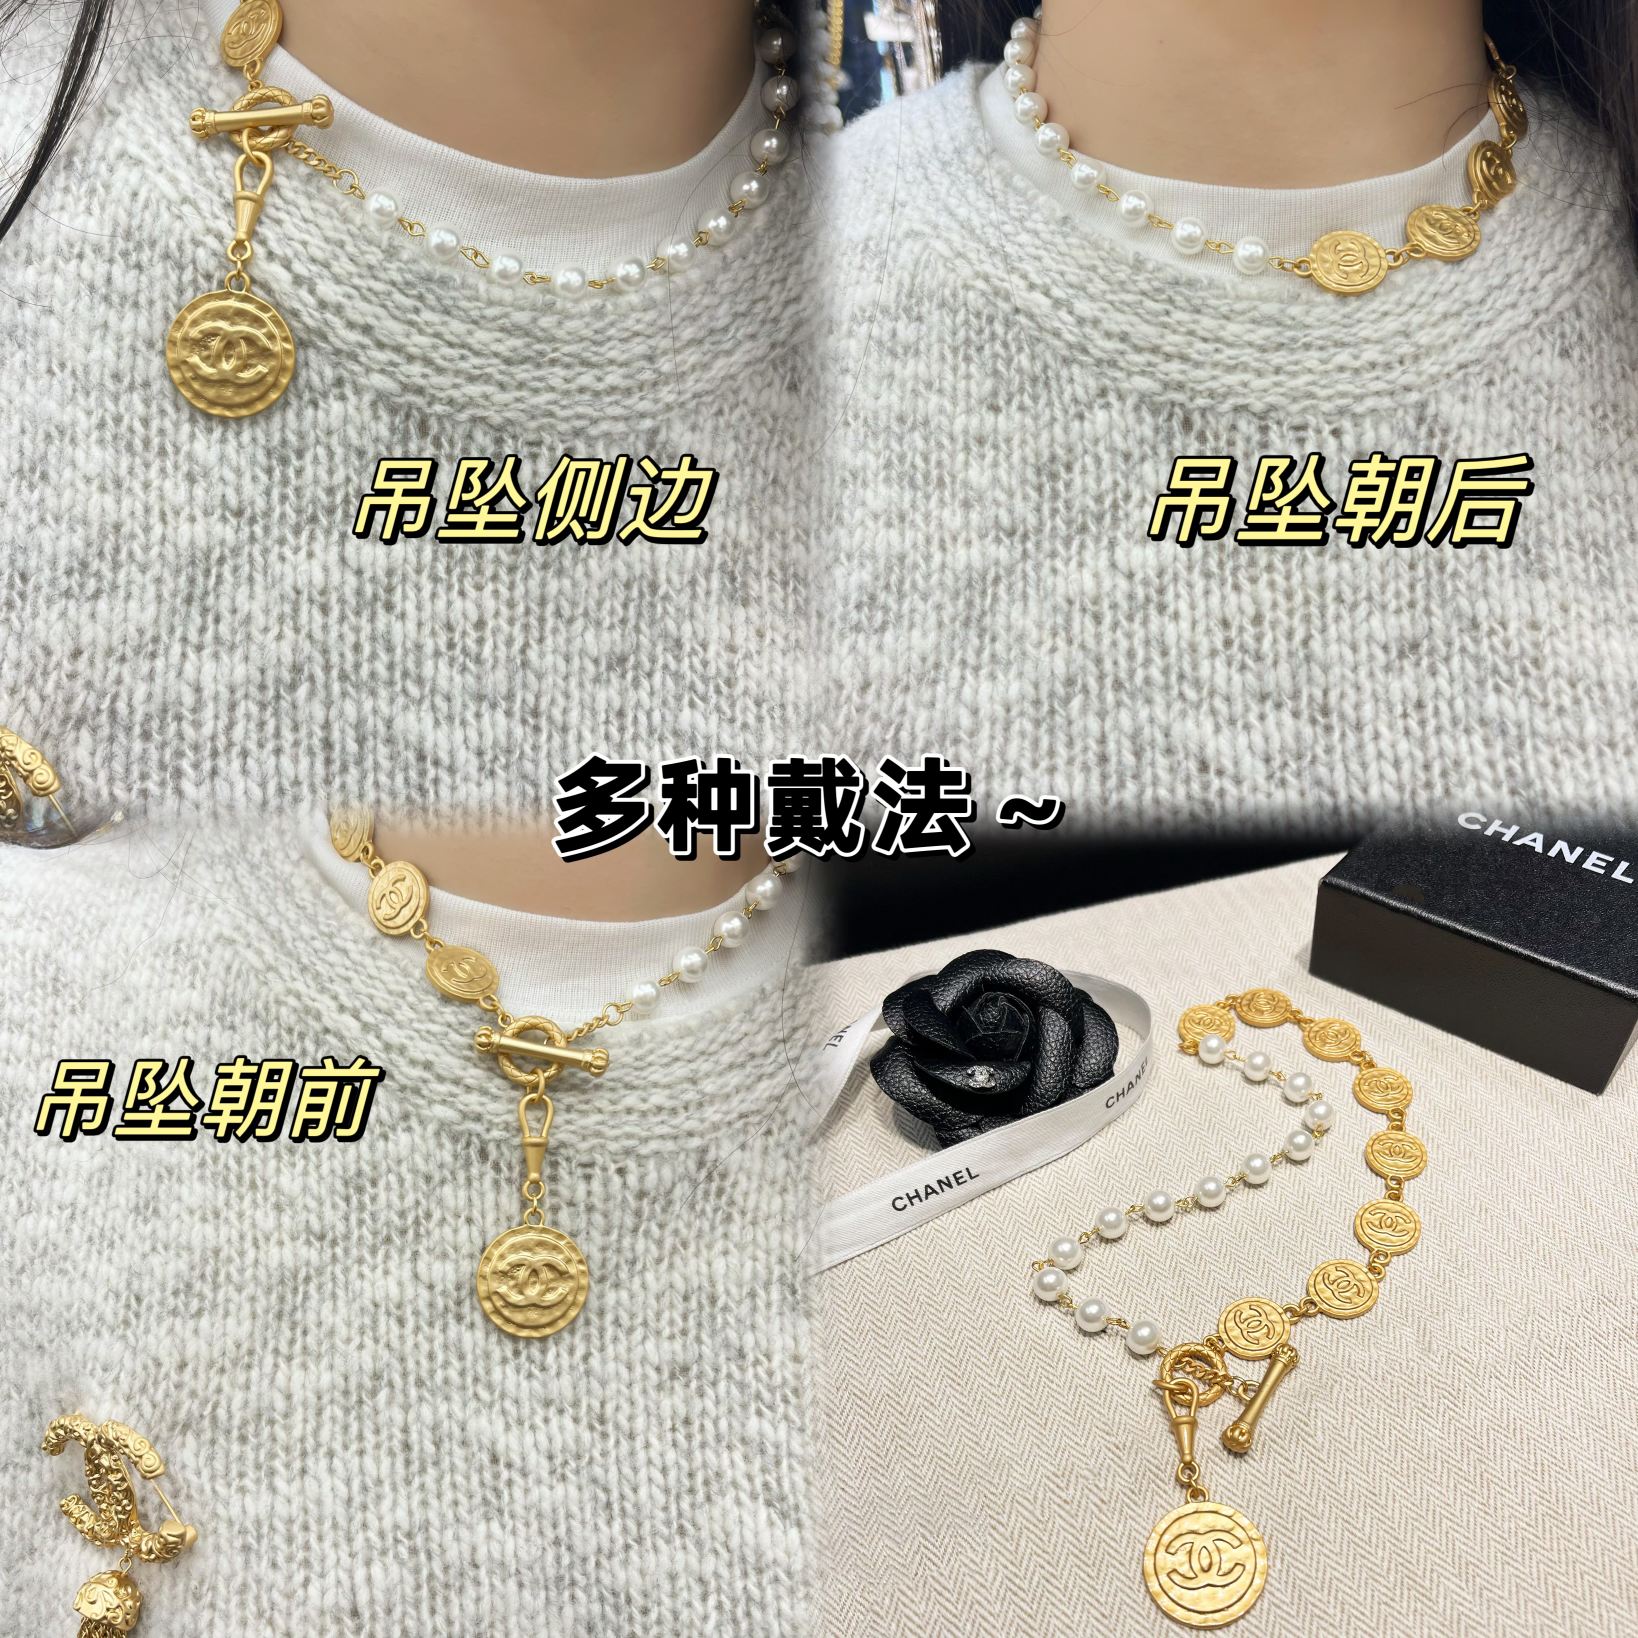 Chanel gold coin pearls necklace 113190